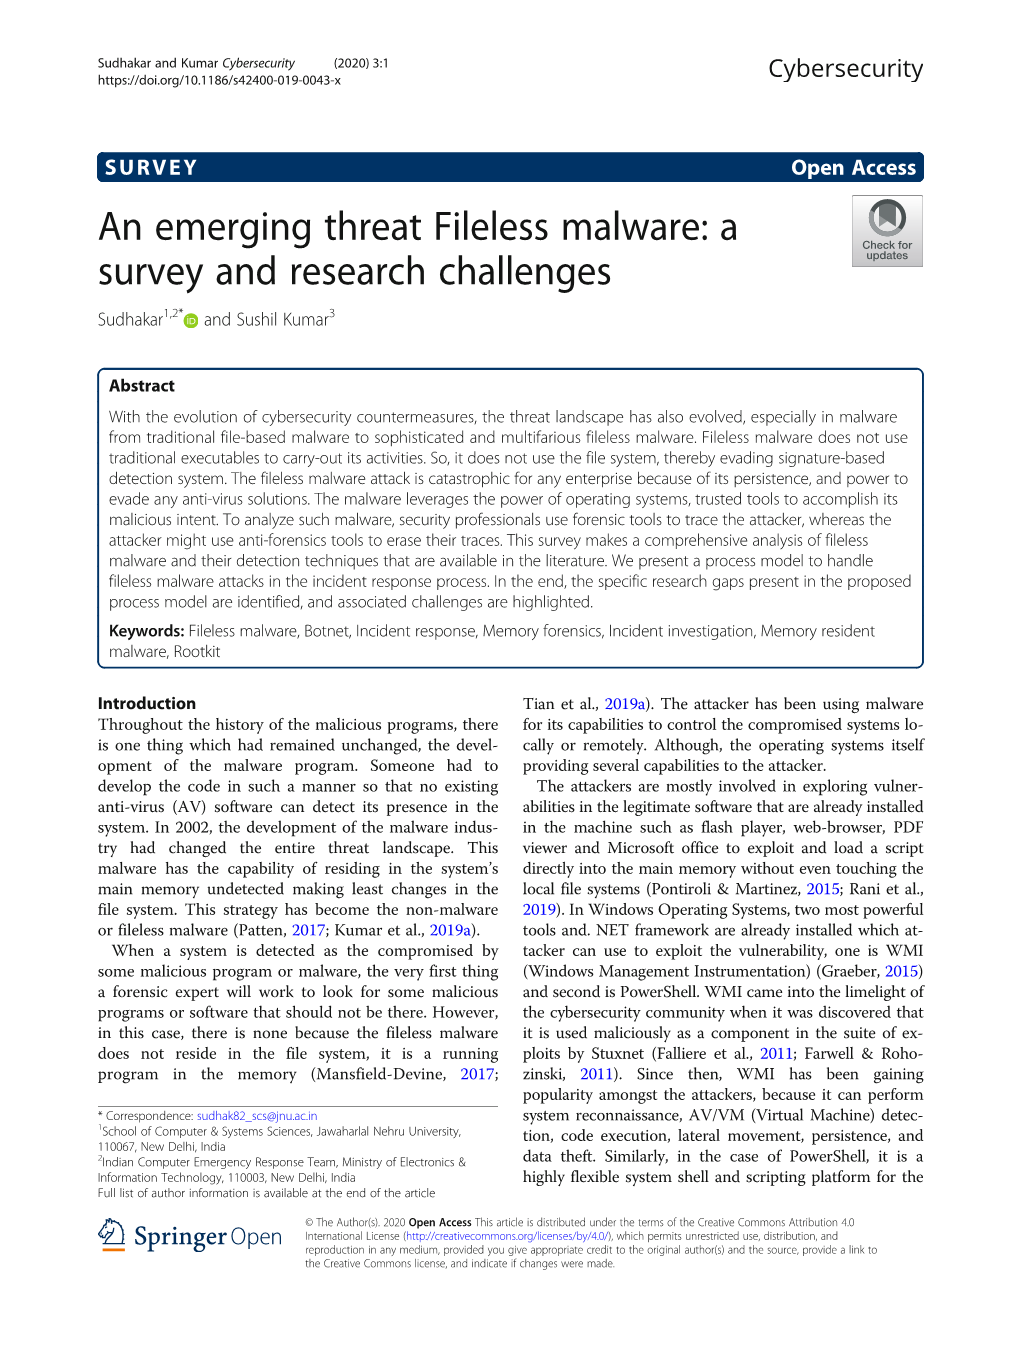 An Emerging Threat Fileless Malware: a Survey and Research Challenges Sudhakar1,2* and Sushil Kumar3